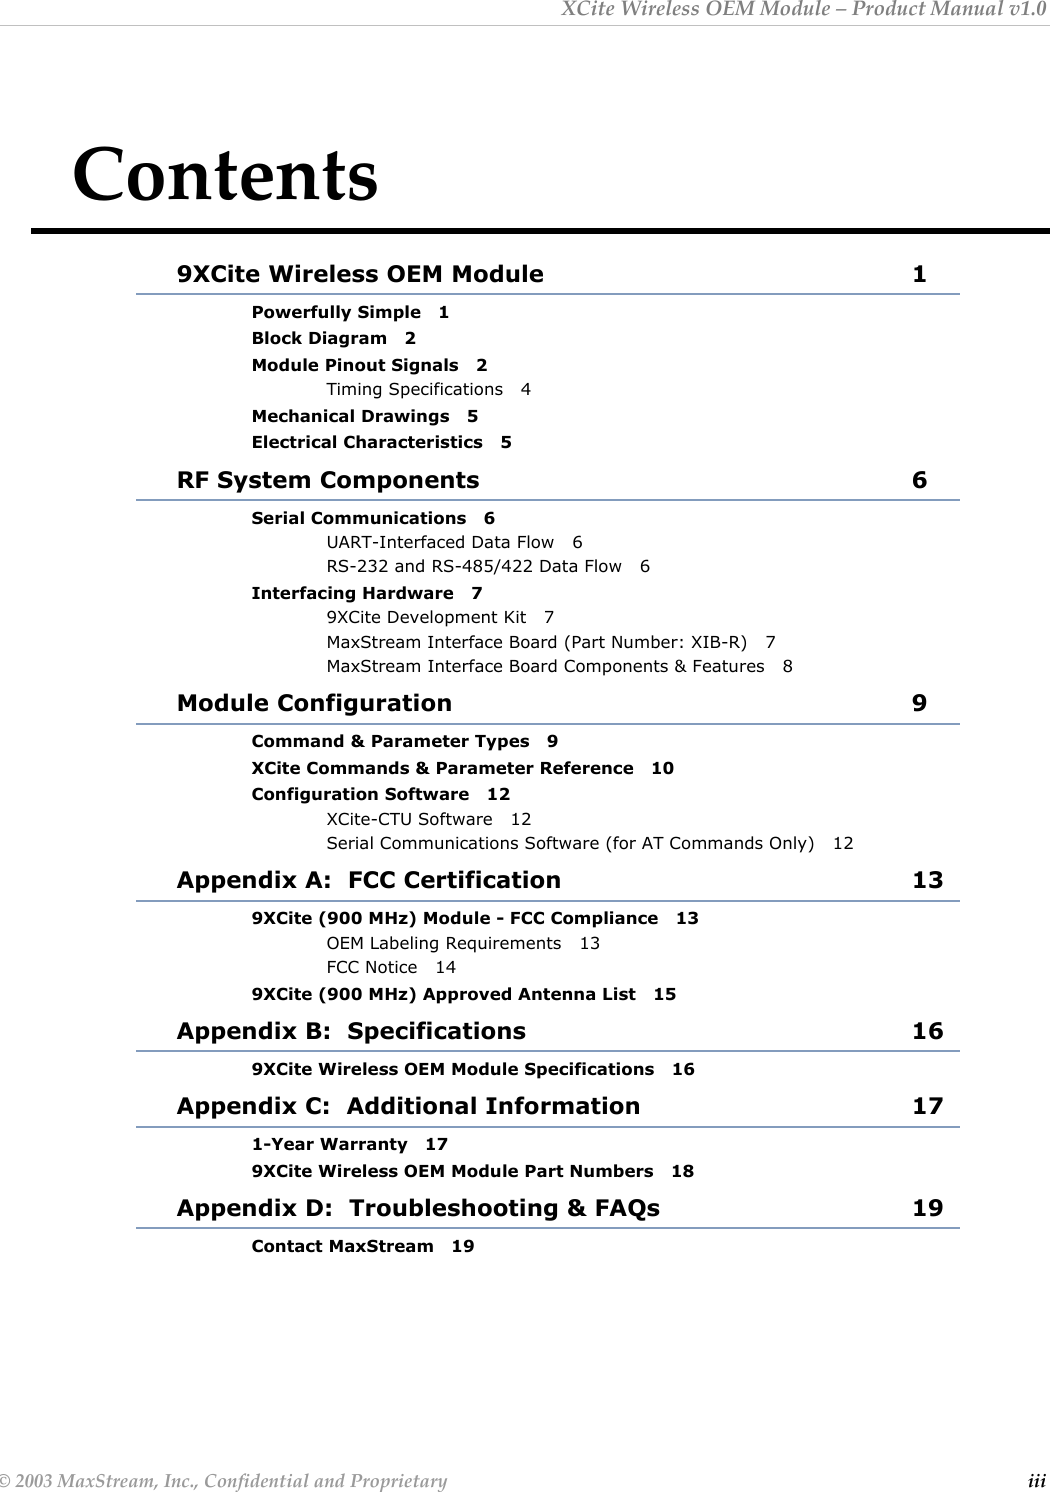 XCite Wireless OEM Module – Product Manual v1.0 Contents 9XCite Wireless OEM Module  1 Powerfully Simple   1 Block Diagram   2 Module Pinout Signals   2 Timing Specifications   4 Mechanical Drawings   5 Electrical Characteristics   5 RF System Components  6 Serial Communications   6 UART-Interfaced Data Flow   6 RS-232 and RS-485/422 Data Flow   6 Interfacing Hardware   7 9XCite Development Kit   7 MaxStream Interface Board (Part Number: XIB-R)   7 MaxStream Interface Board Components &amp; Features   8 Module Configuration  9 Command &amp; Parameter Types   9 XCite Commands &amp; Parameter Reference   10 Configuration Software   12 XCite-CTU Software   12 Serial Communications Software (for AT Commands Only)   12 Appendix A:  FCC Certification  13 9XCite (900 MHz) Module - FCC Compliance   13 OEM Labeling Requirements   13 FCC Notice   14 9XCite (900 MHz) Approved Antenna List   15 Appendix B:  Specifications  16 9XCite Wireless OEM Module Specifications   16 Appendix C:  Additional Information  17 1-Year Warranty   17 9XCite Wireless OEM Module Part Numbers   18 Appendix D:  Troubleshooting &amp; FAQs  19 Contact MaxStream   19  © 2003 MaxStream, Inc., Confidential and Proprietary  iii